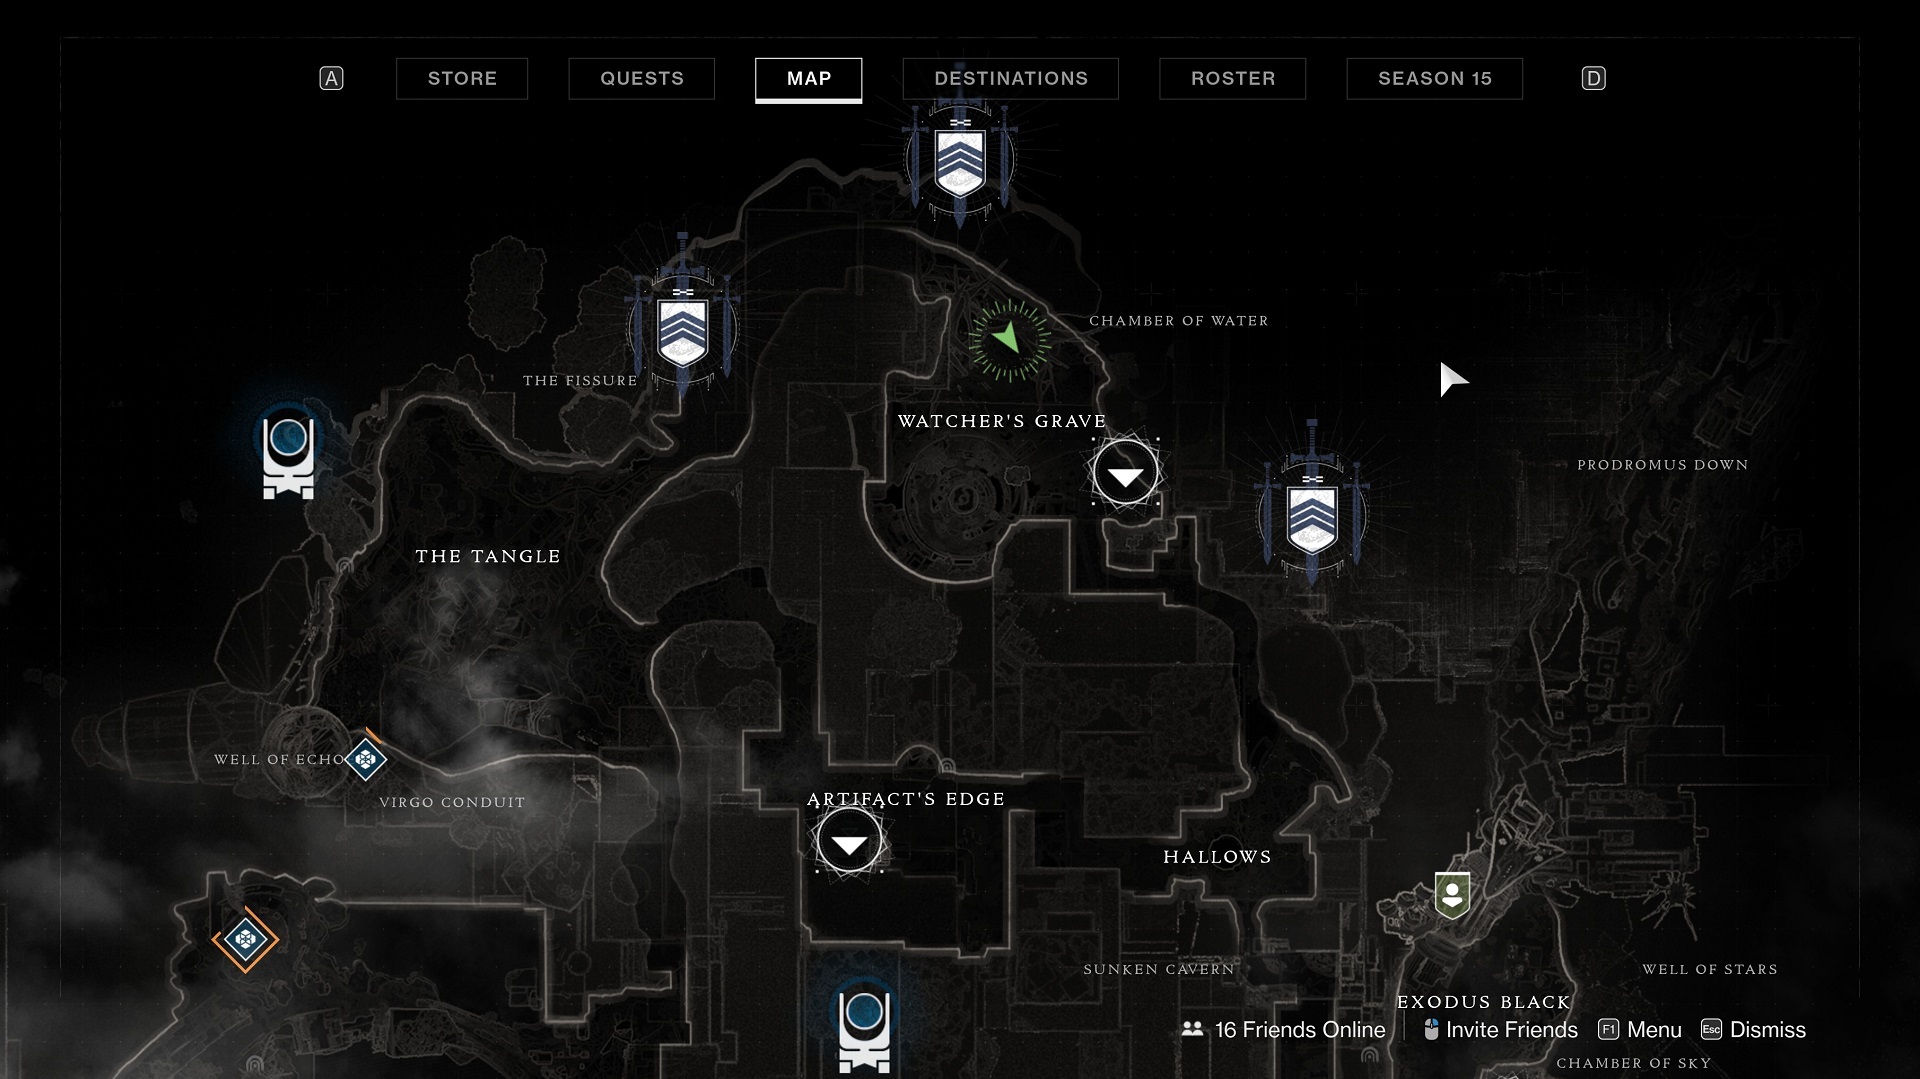 Where Is Xur Today?